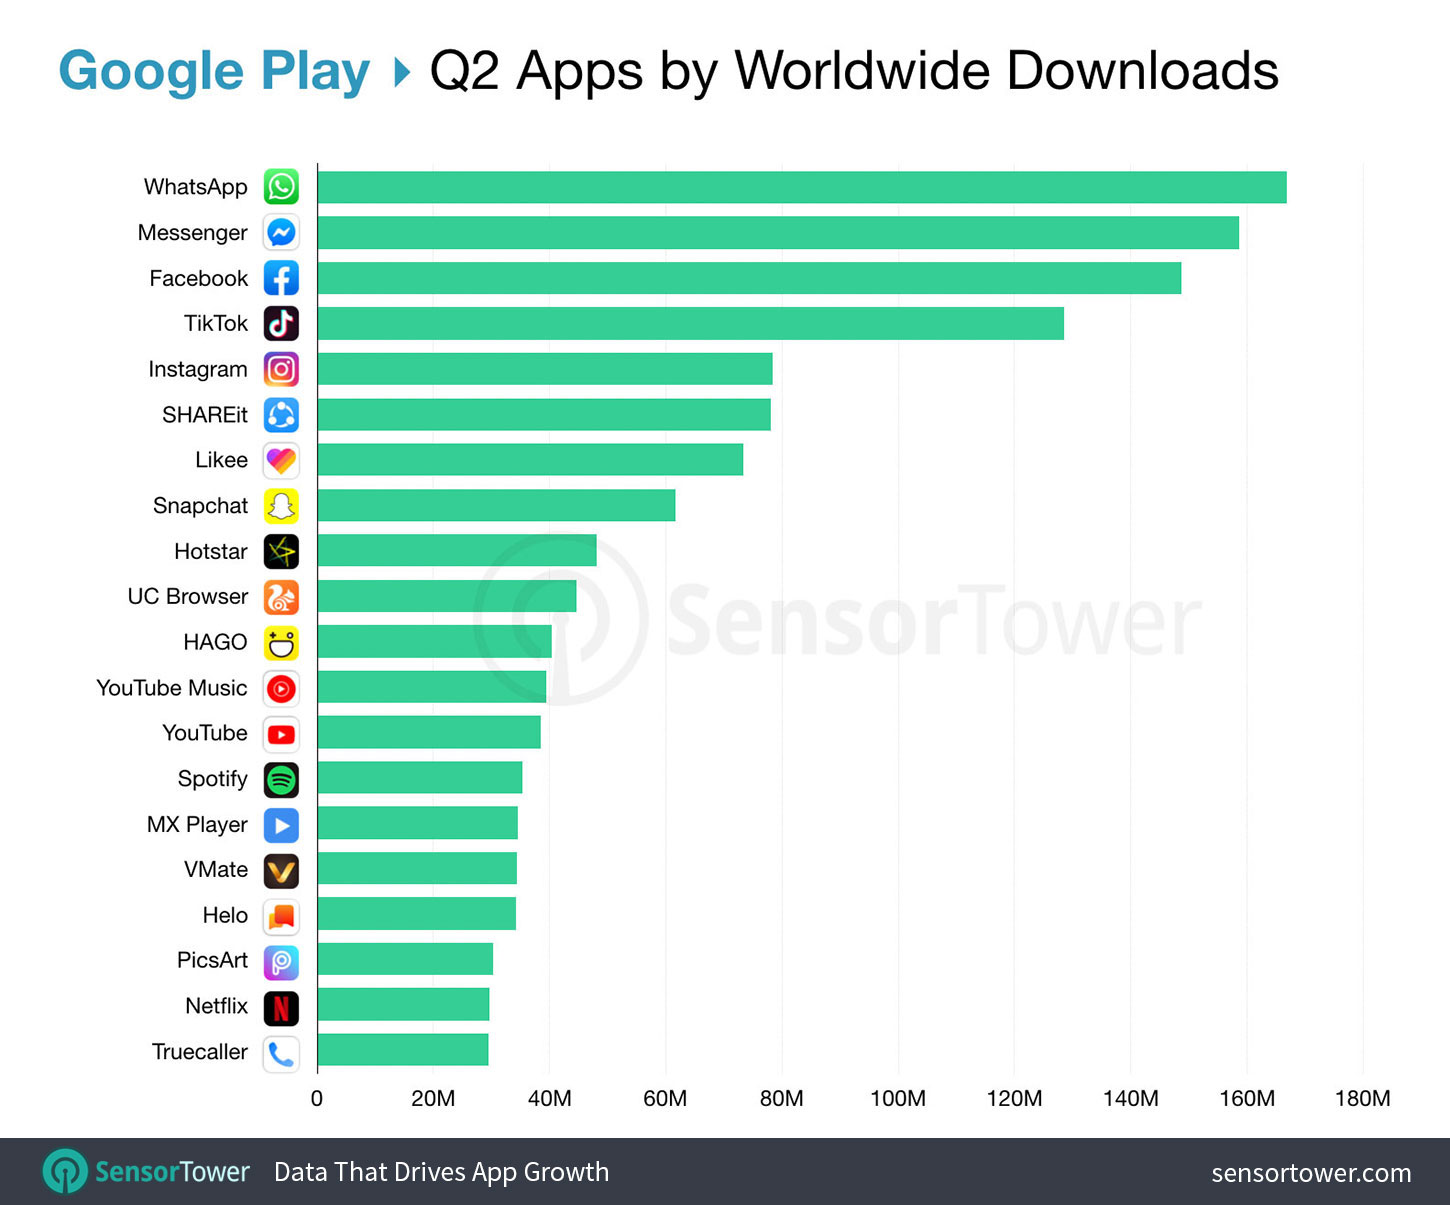 Top Google Play Apps Worldwide for Q2 2019